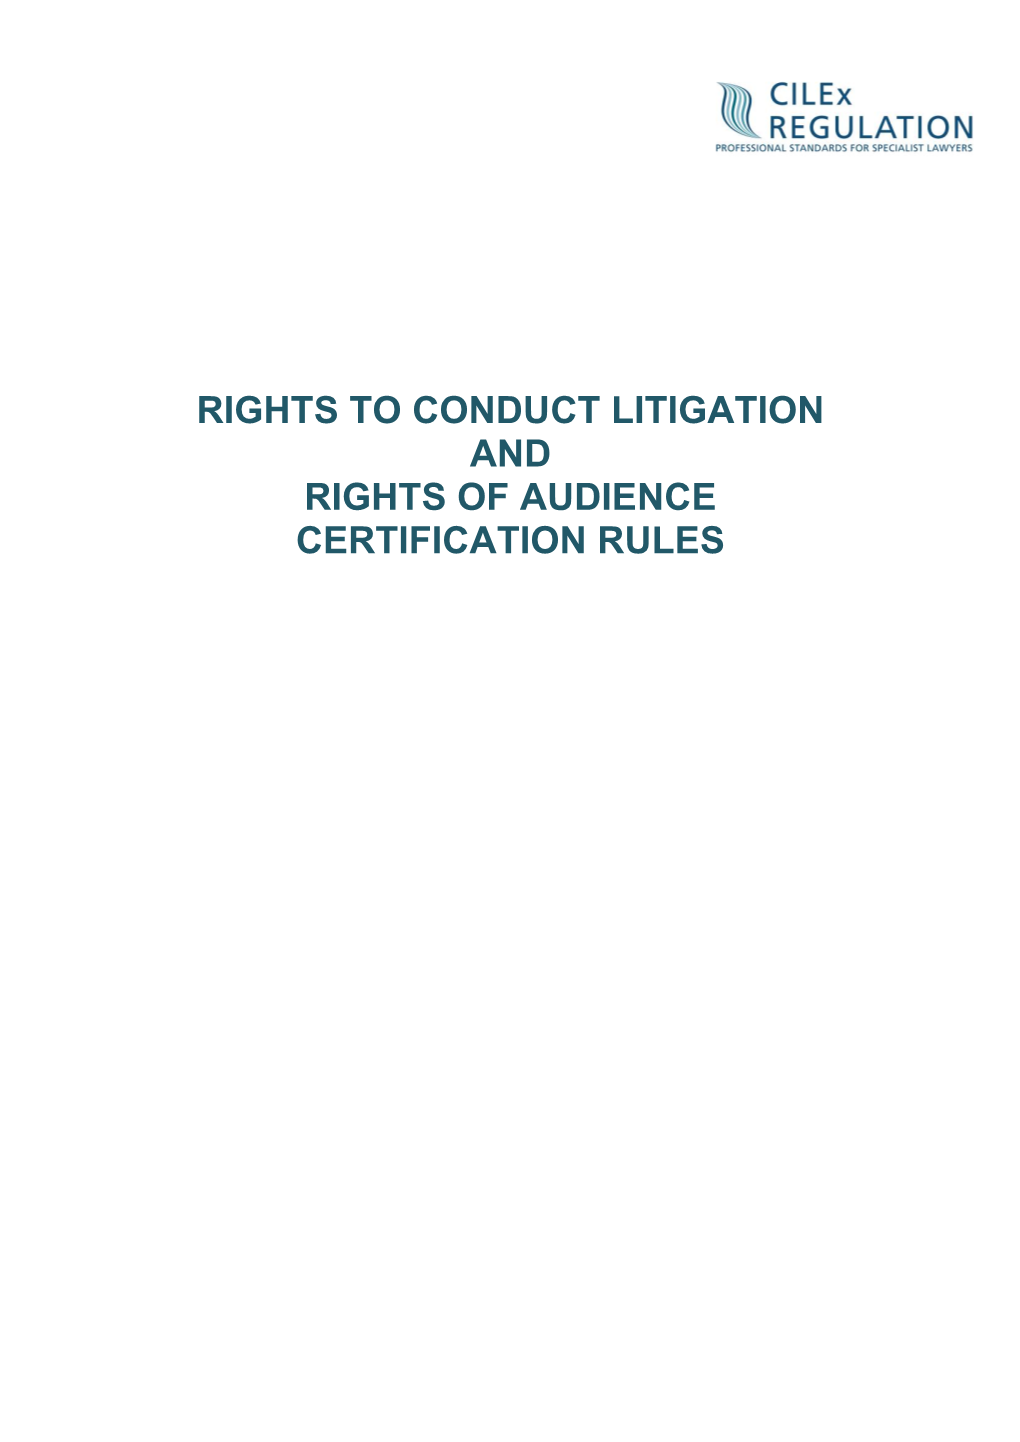 Rights to Conduct Litigation and Rights of Audience Certification Rules